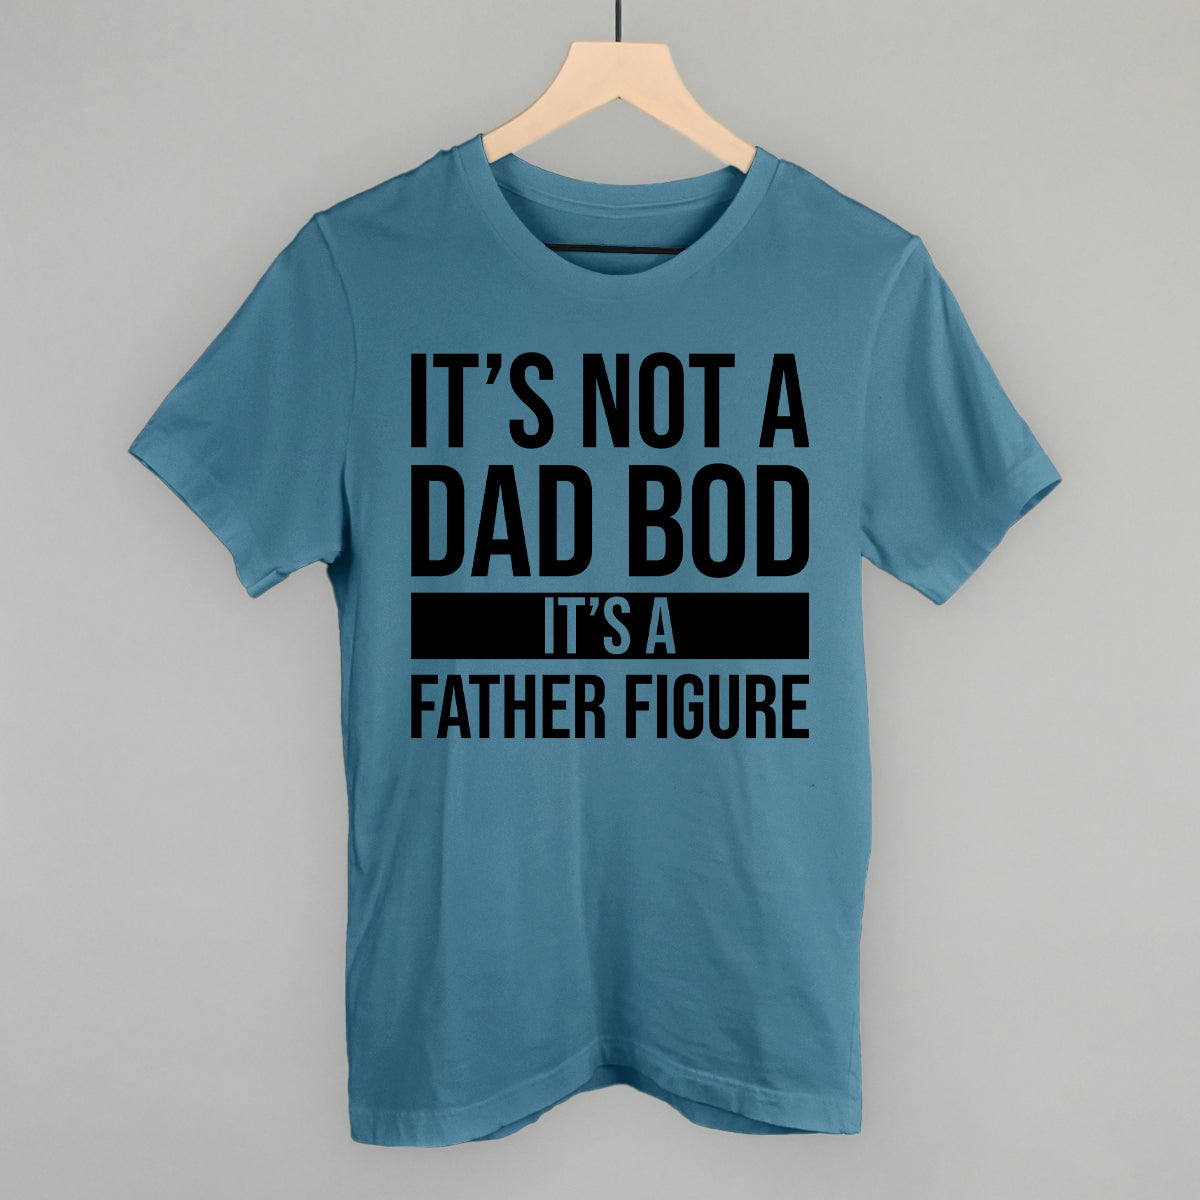 It's Not a Dad Bod